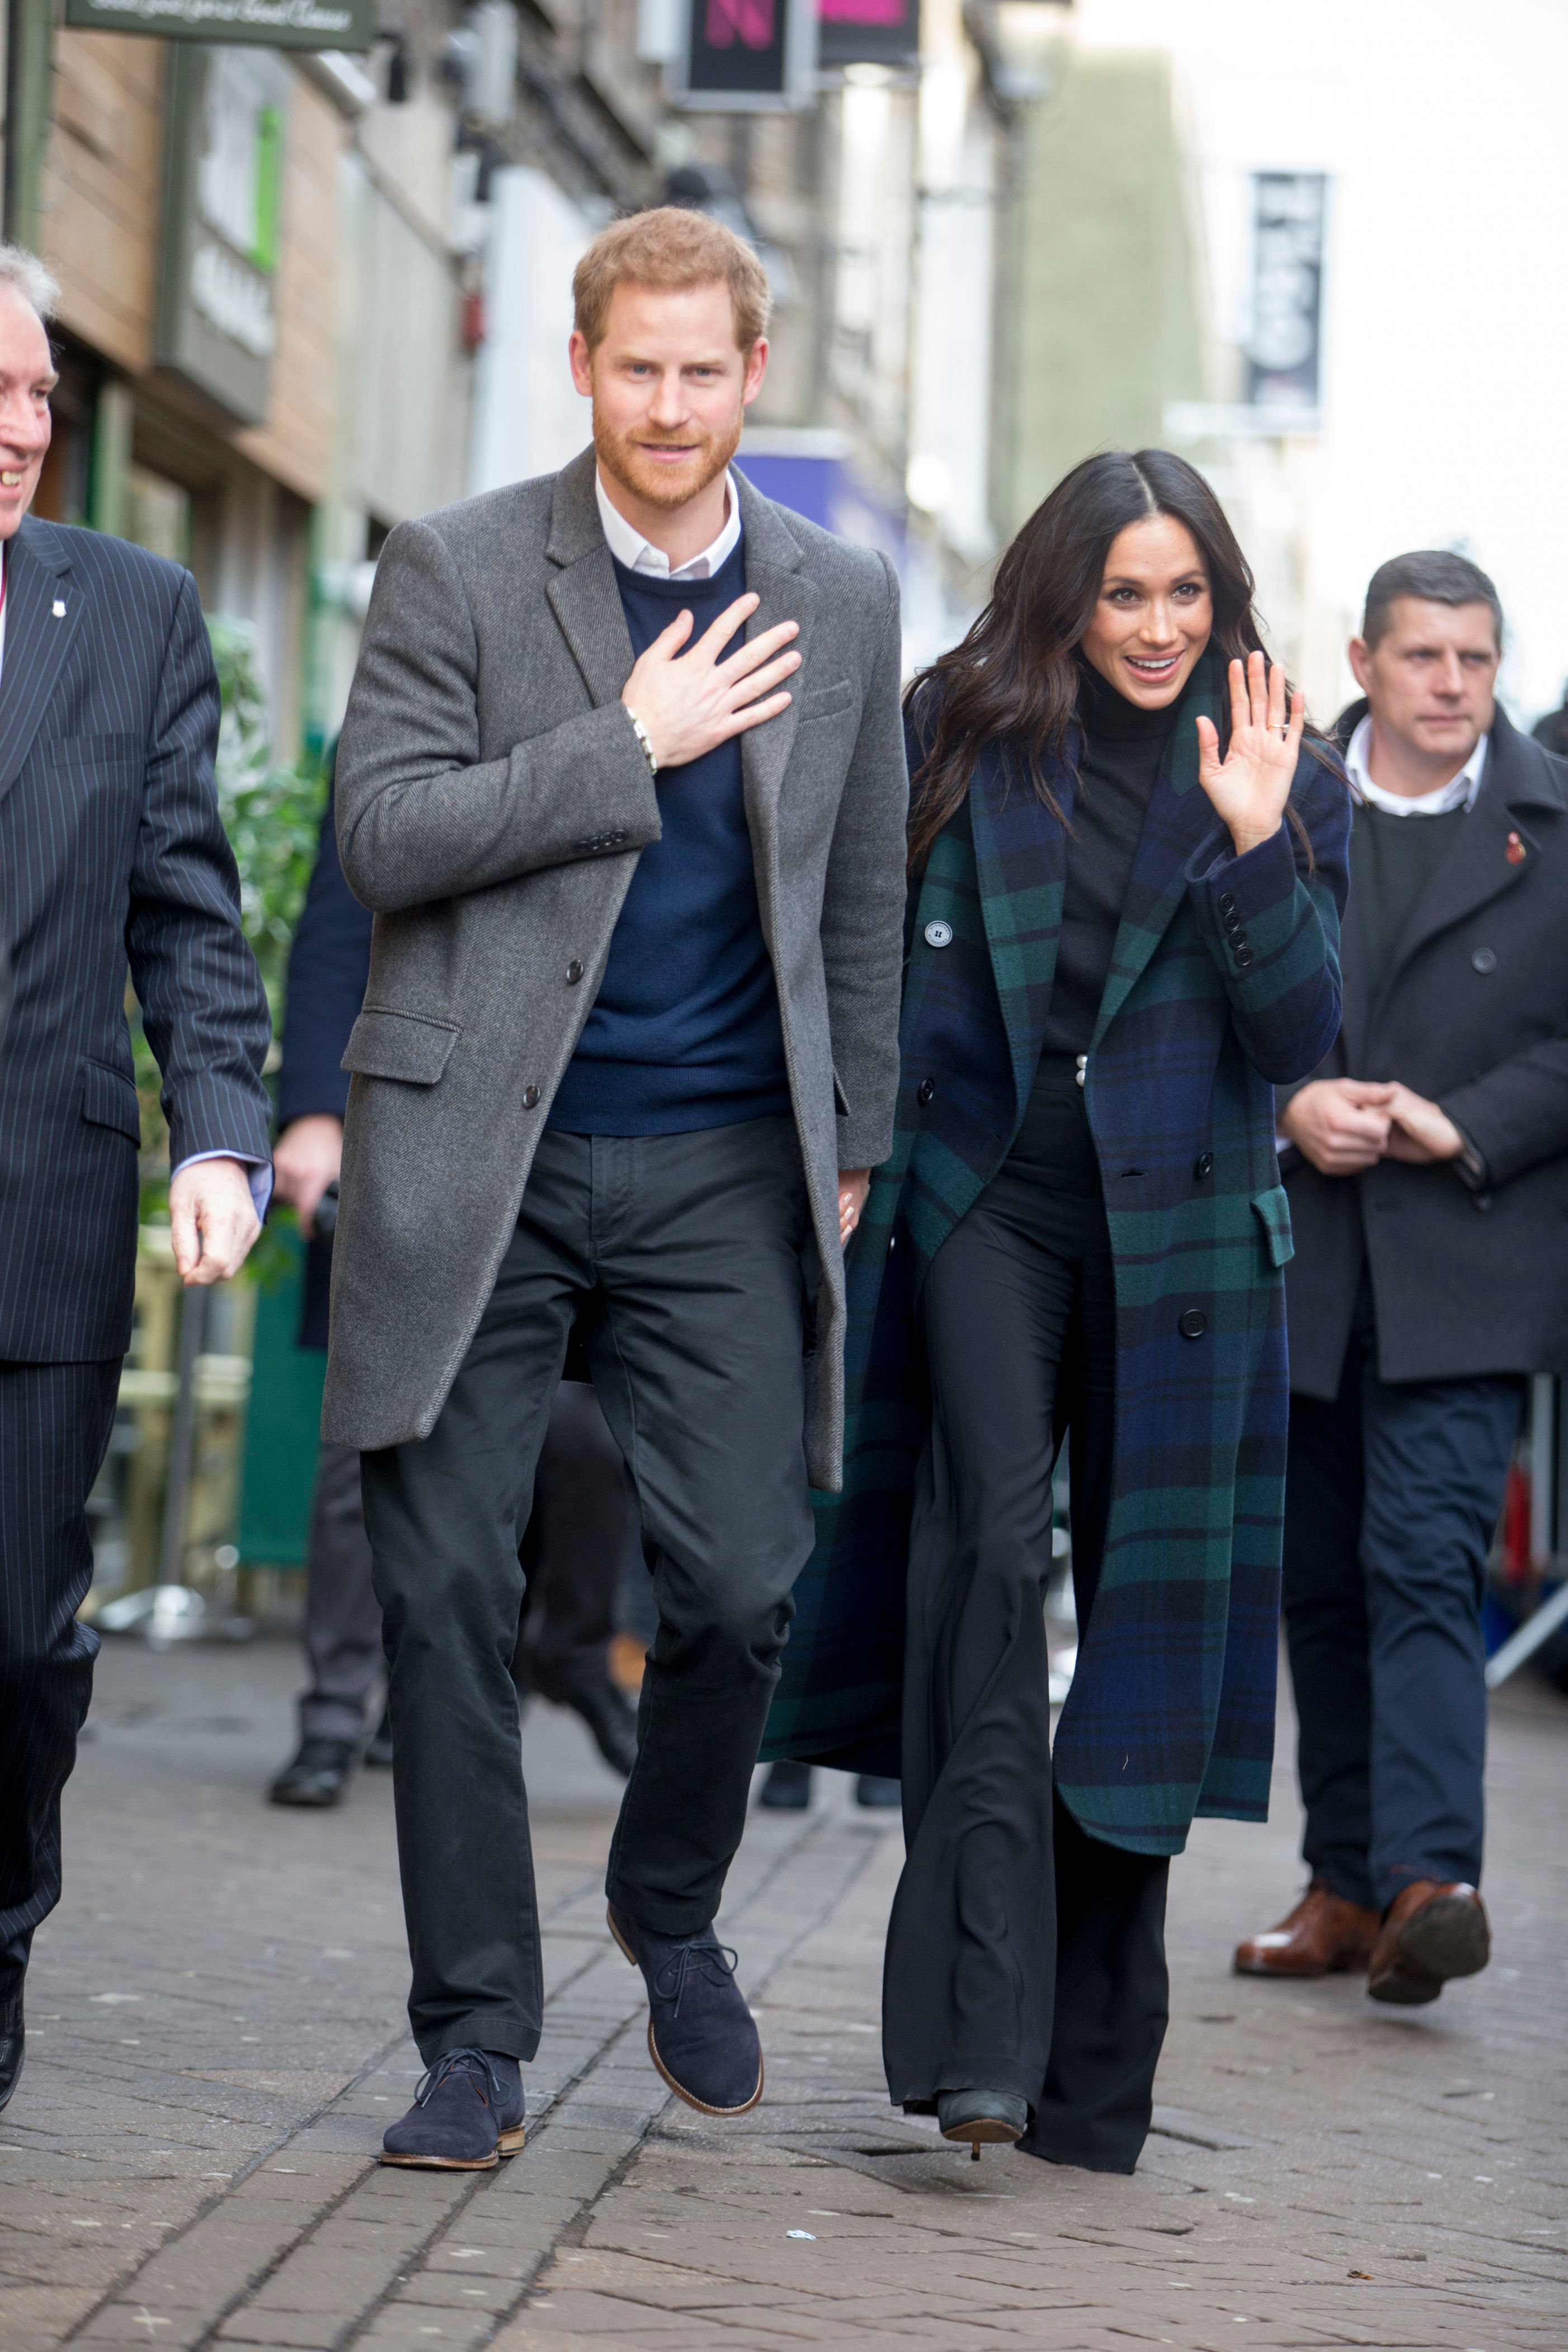 <p><a href="https://www.wonderwall.com/celebrity/profiles/overview/prince-harry-481.article">Prince Harry</a> brought then-fiancée Meghan Markle -- who donned a Burberry's Black Watch tartan coat for the occasion -- to visit the Social Bite charity shop in Edinburgh, Scotland, where they met with organizers and staff and heard about their work with the homeless, on Feb. 13, 2018. In Scotland, the couple are known as the Earl and Countess of Dumbarton.</p>